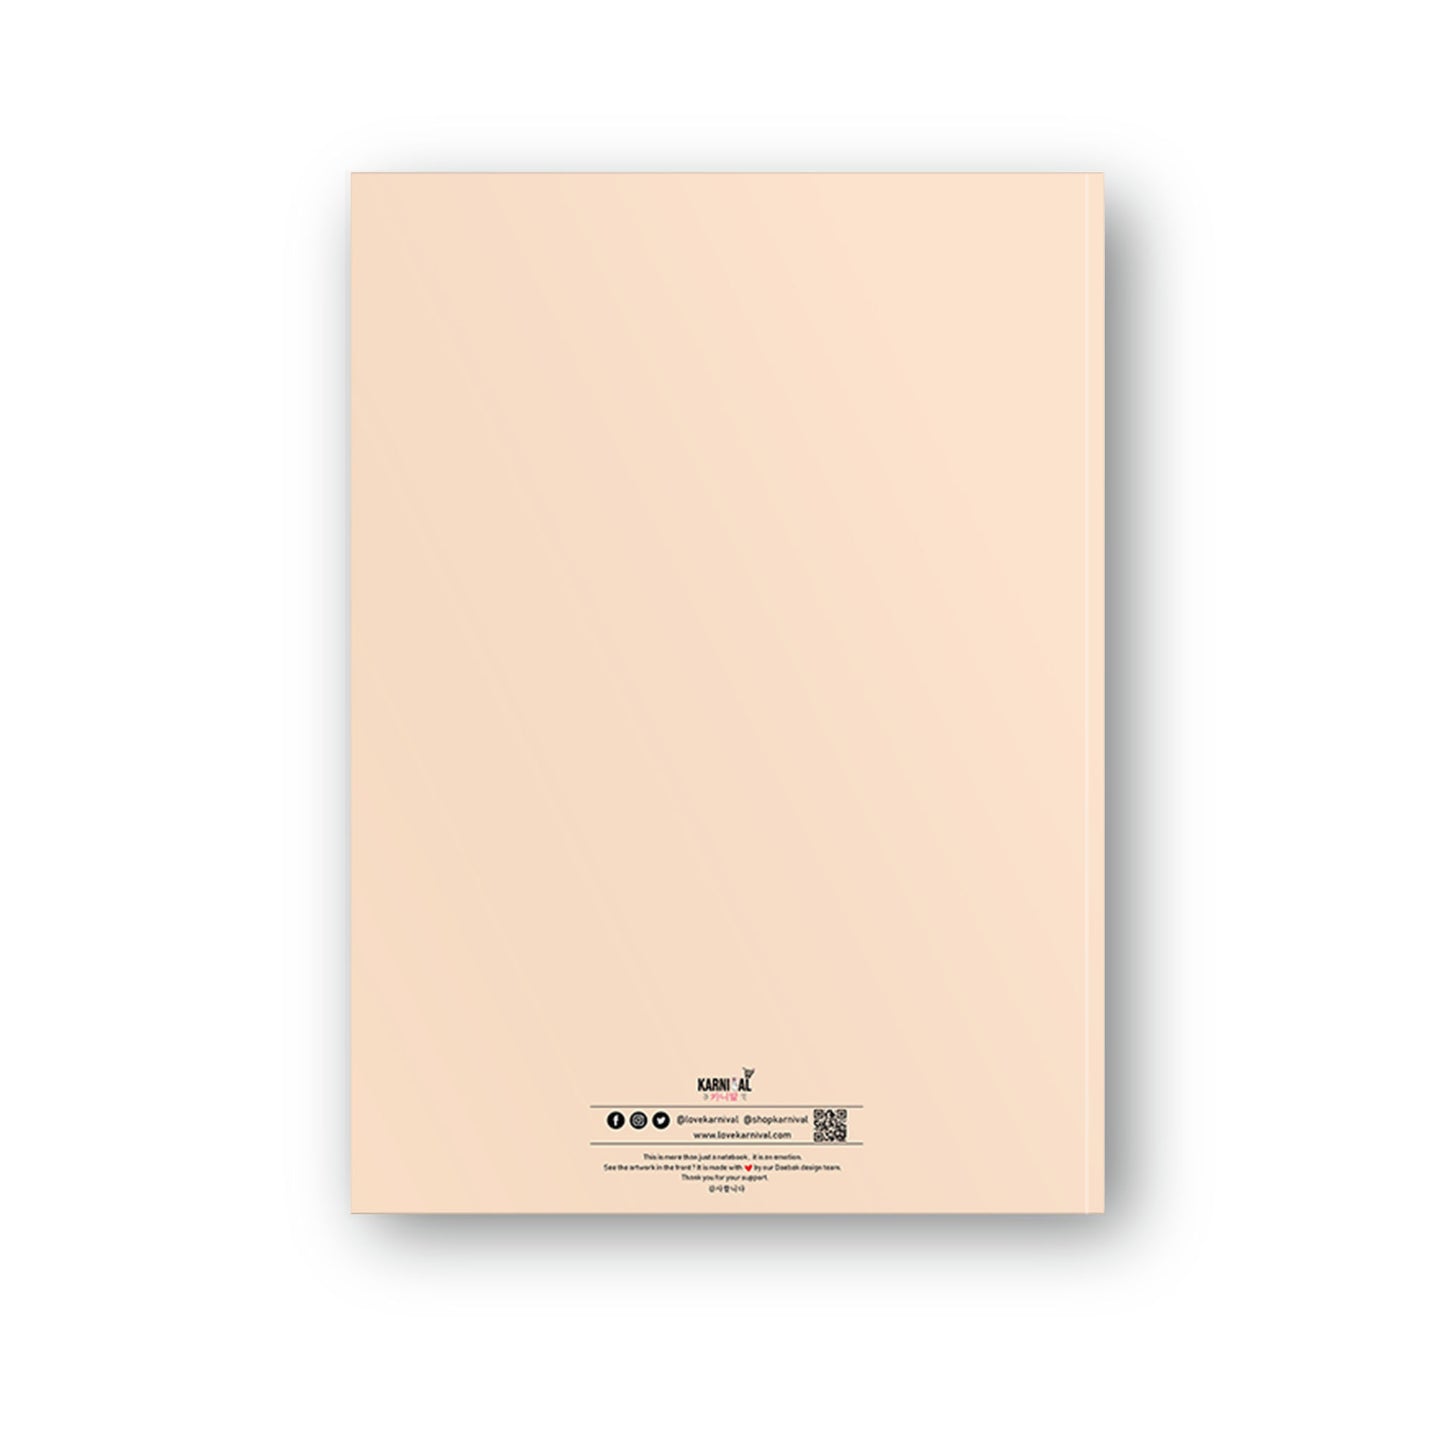 RM BTS Persona Notebook